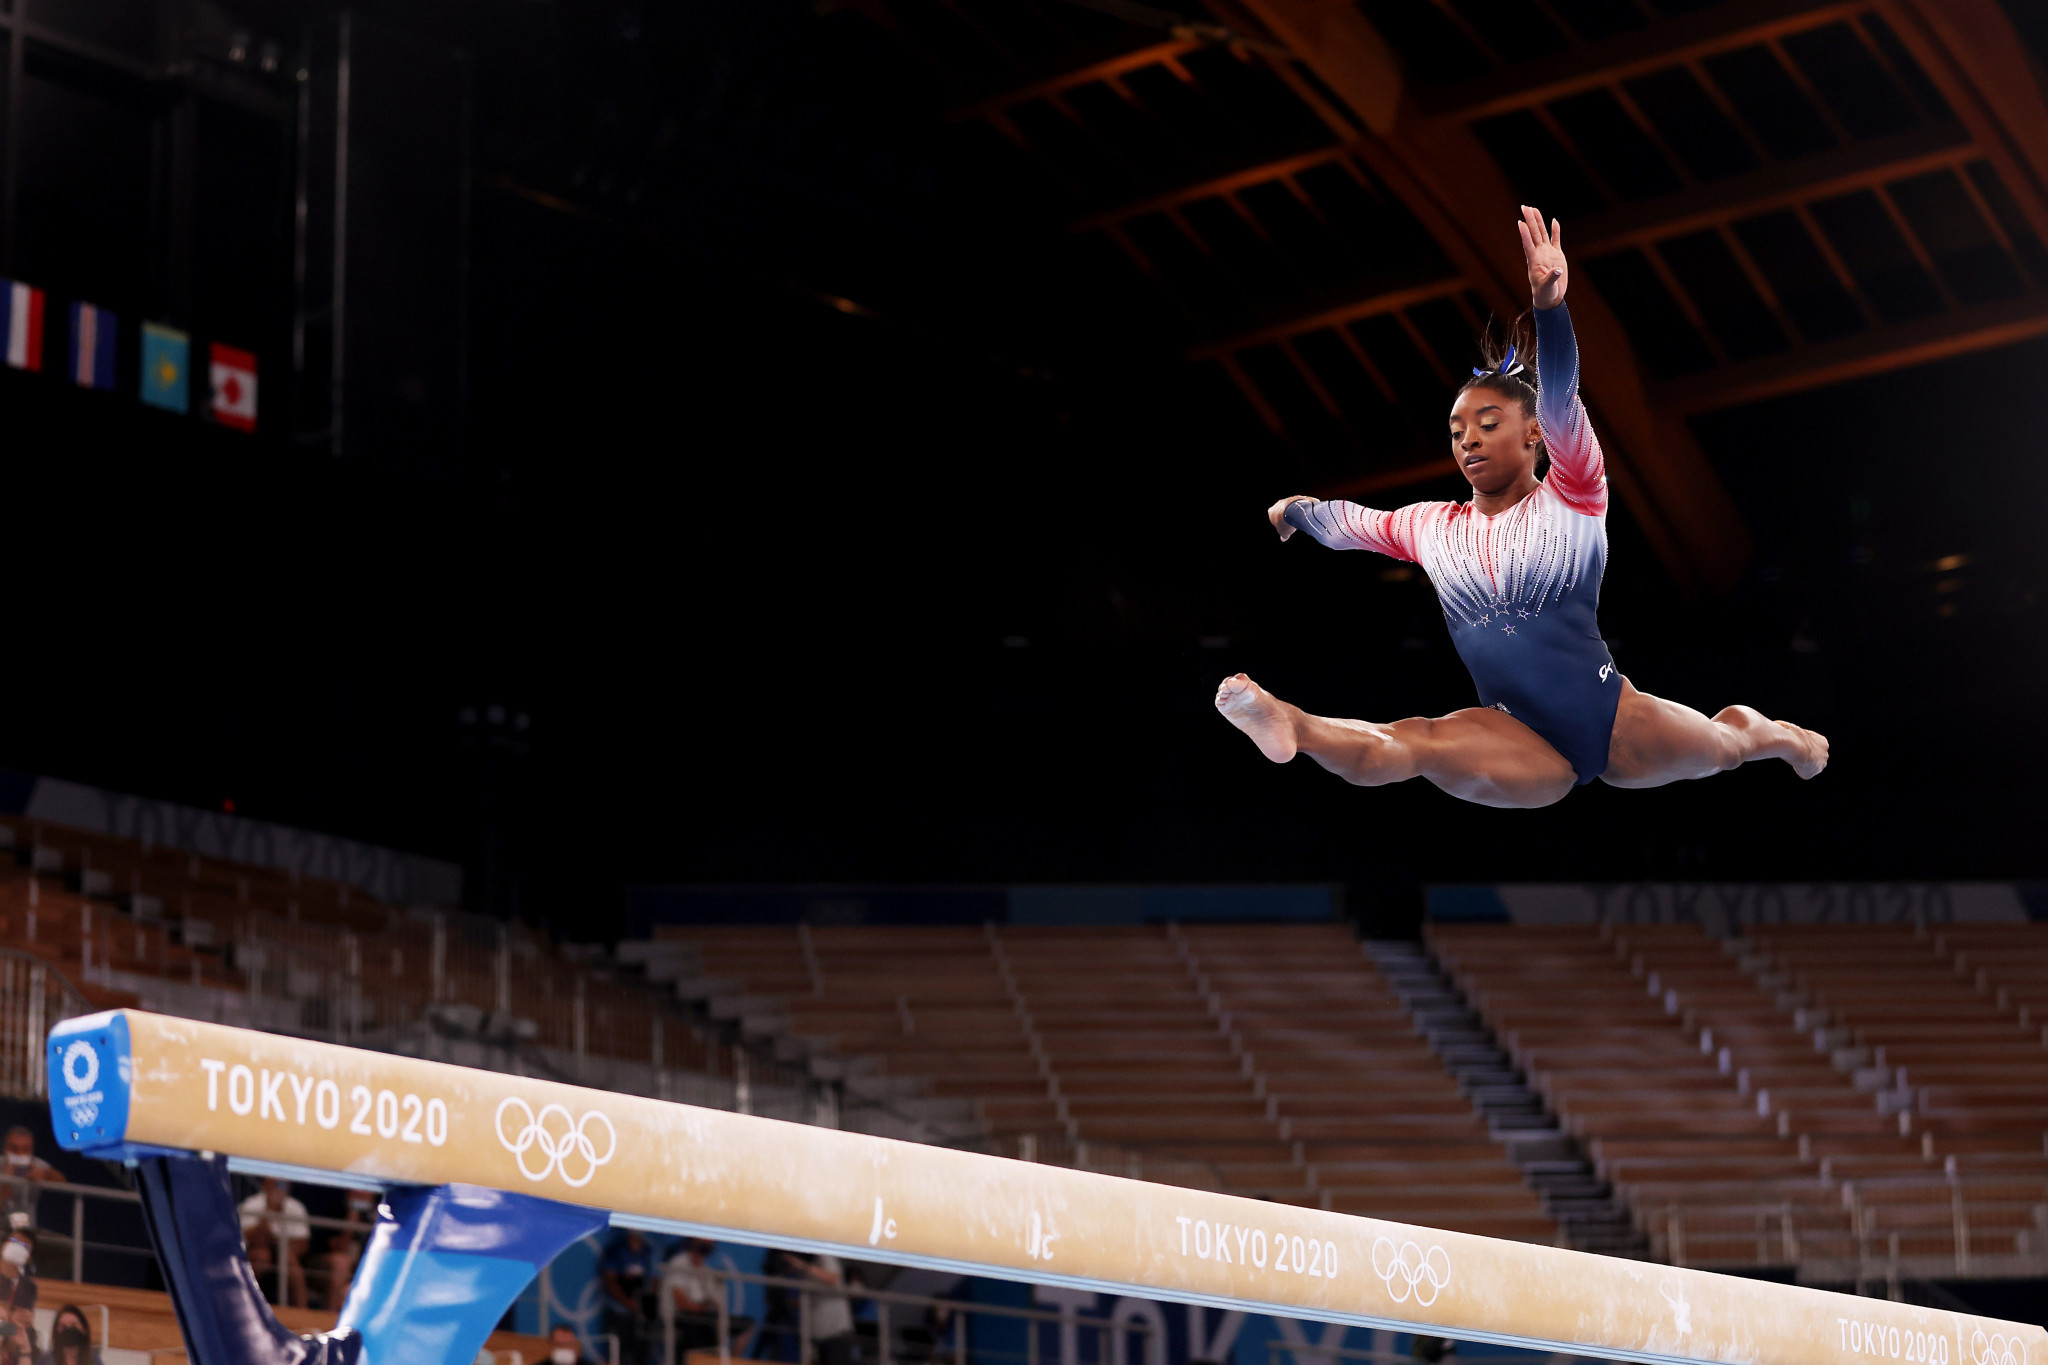 Simone Biles has said she should have "quit way before Tokyo" after suffering from the "twisties" and withdrawing from the majority of her events ©Getty Images